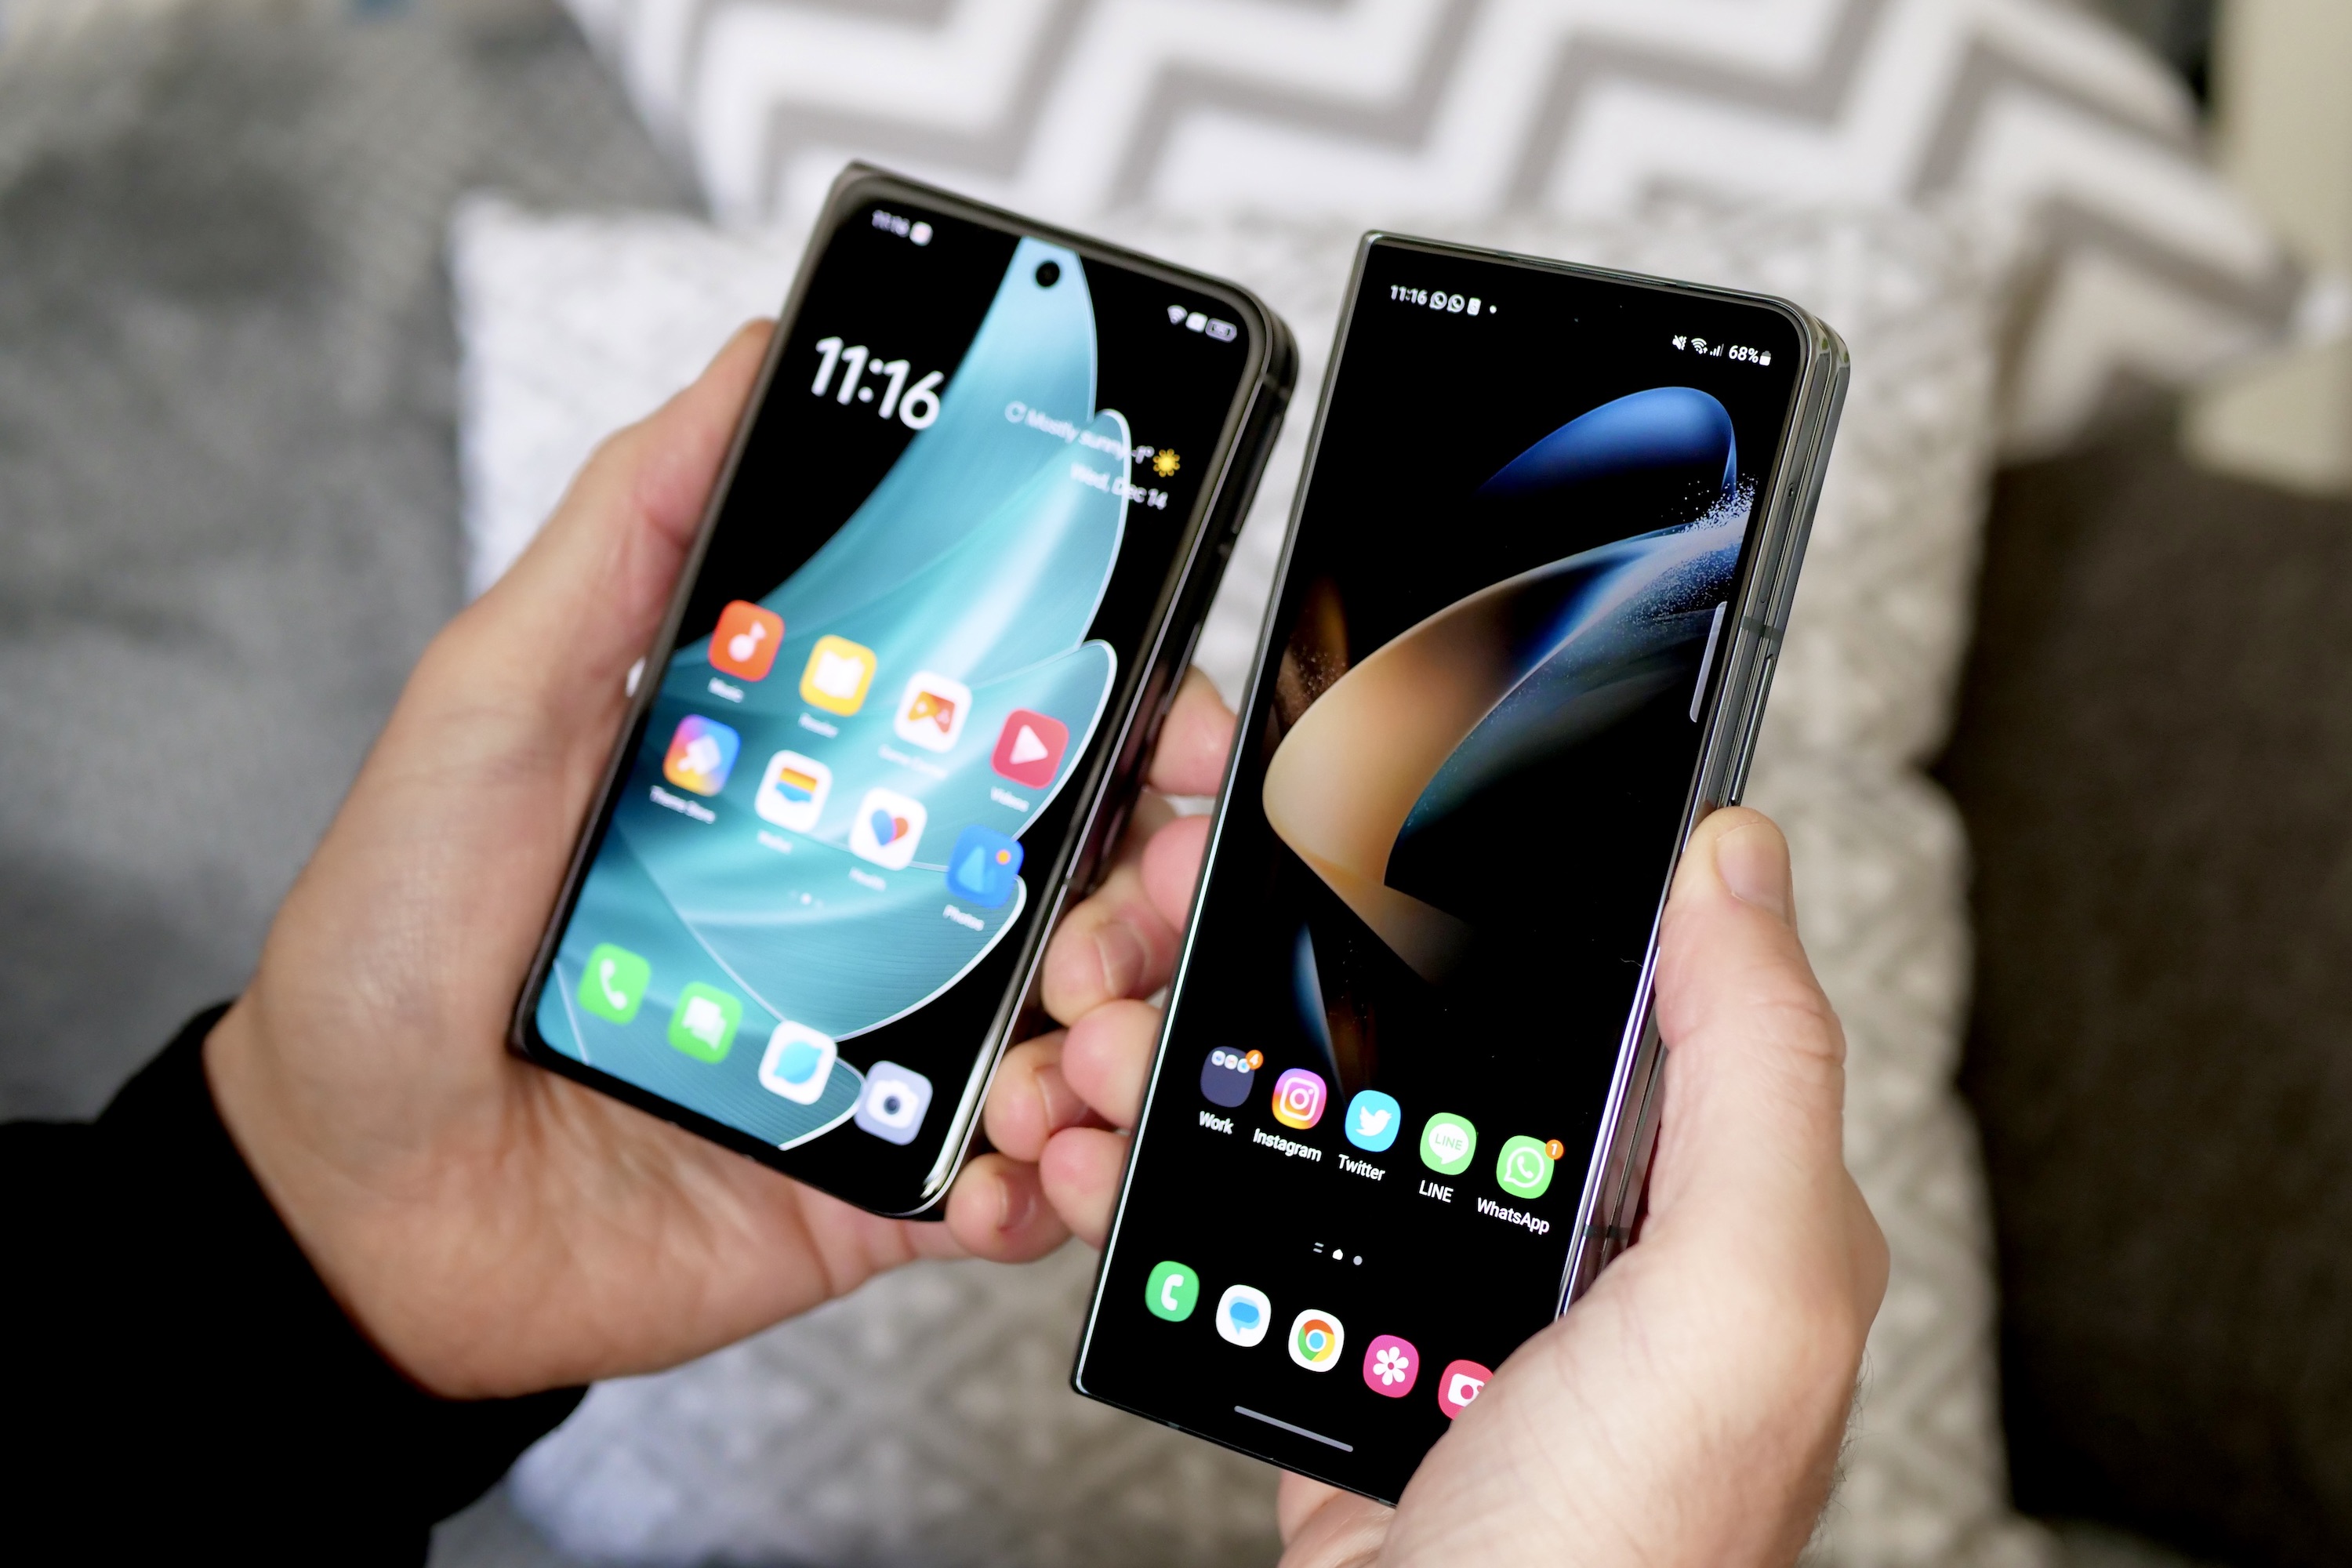 Samsung Galaxy Z Fold4 – Colors, Features & Reviews